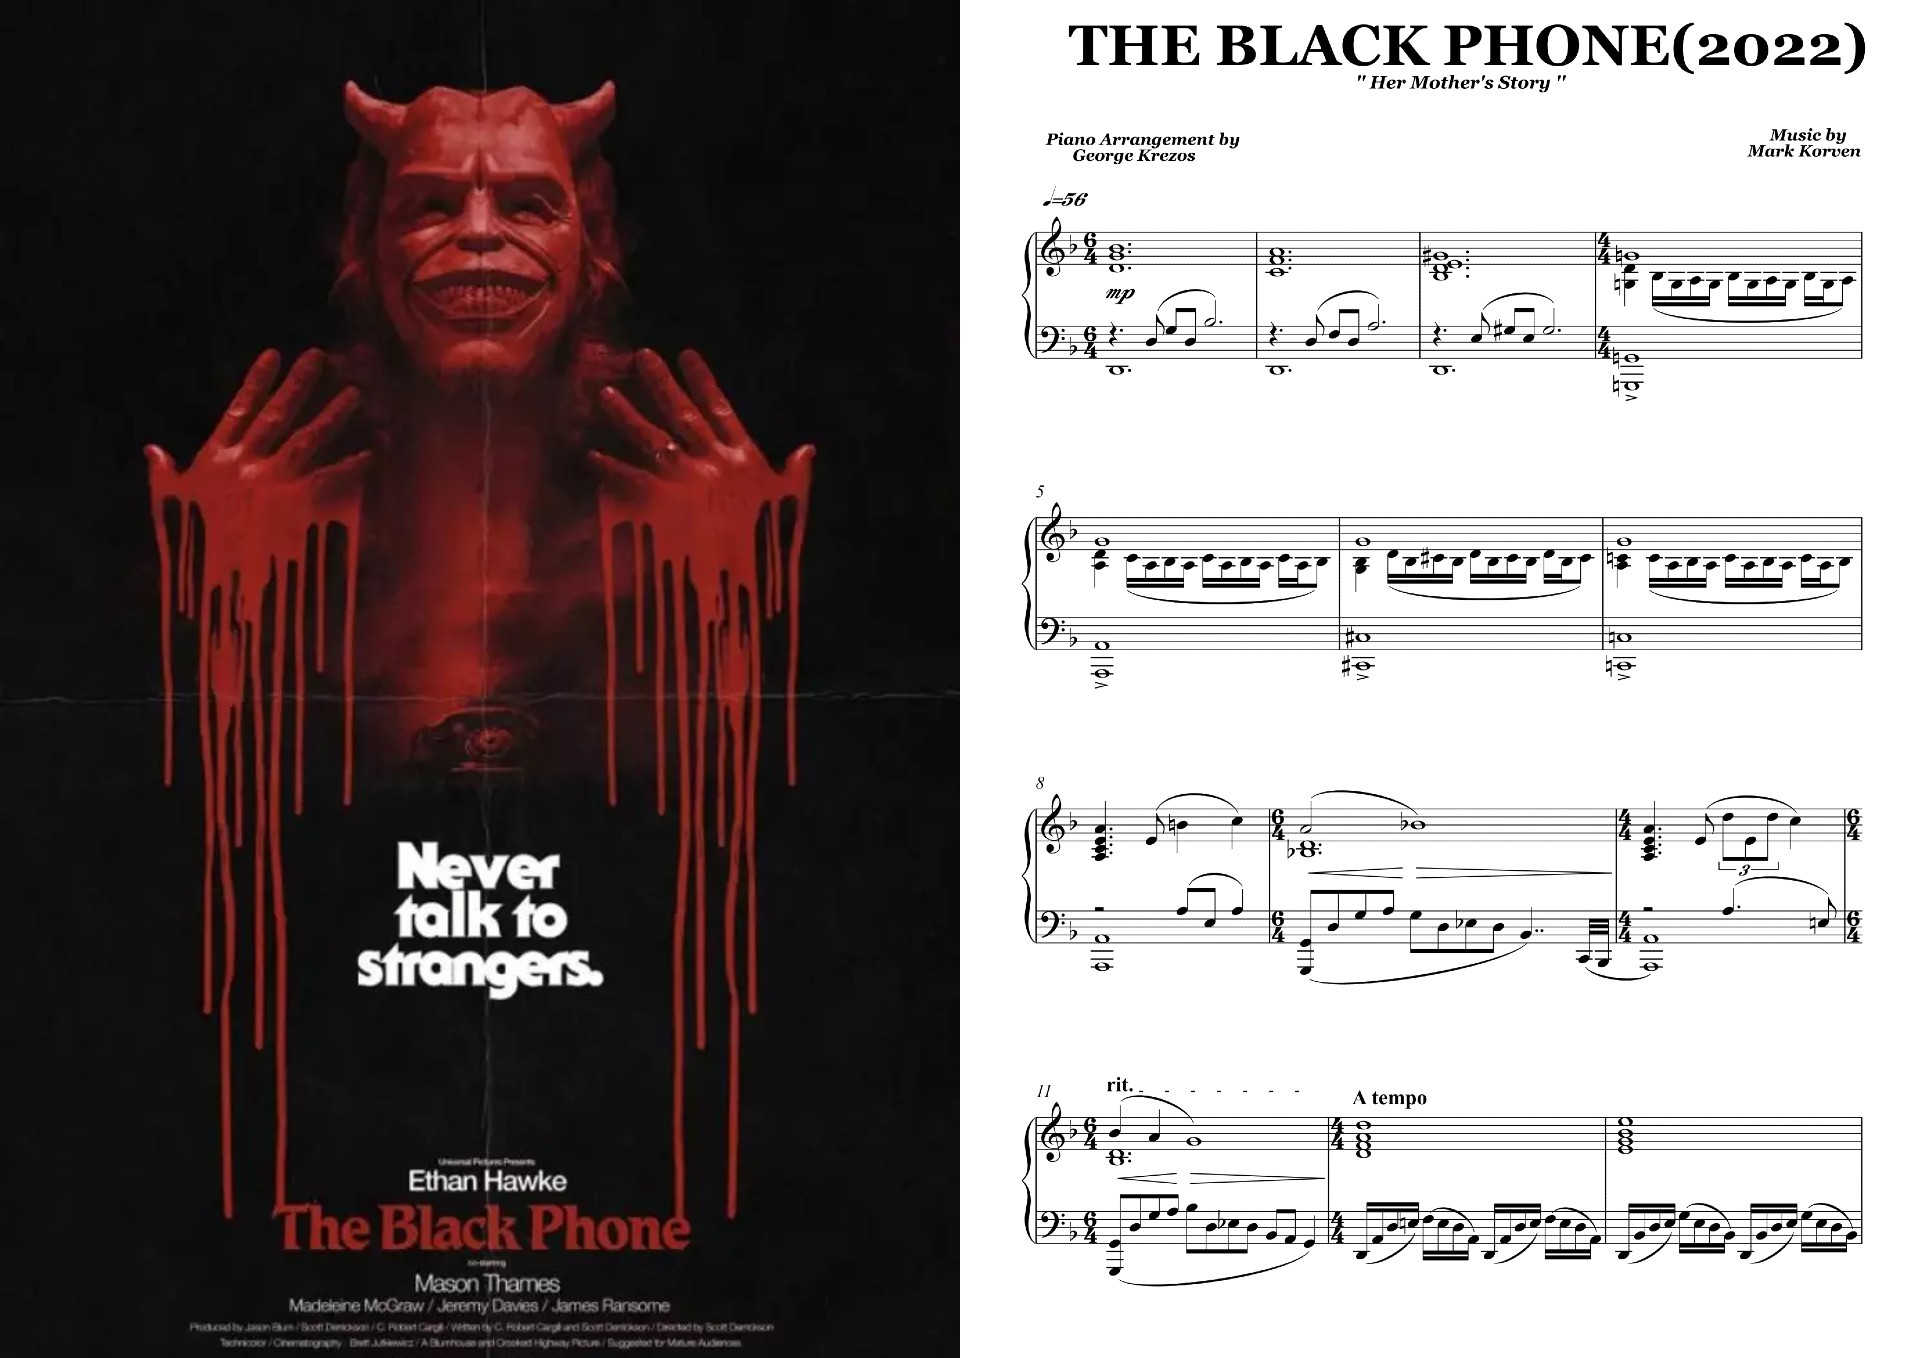 THE BLACK PHONE - Her Mother's Story.jpg